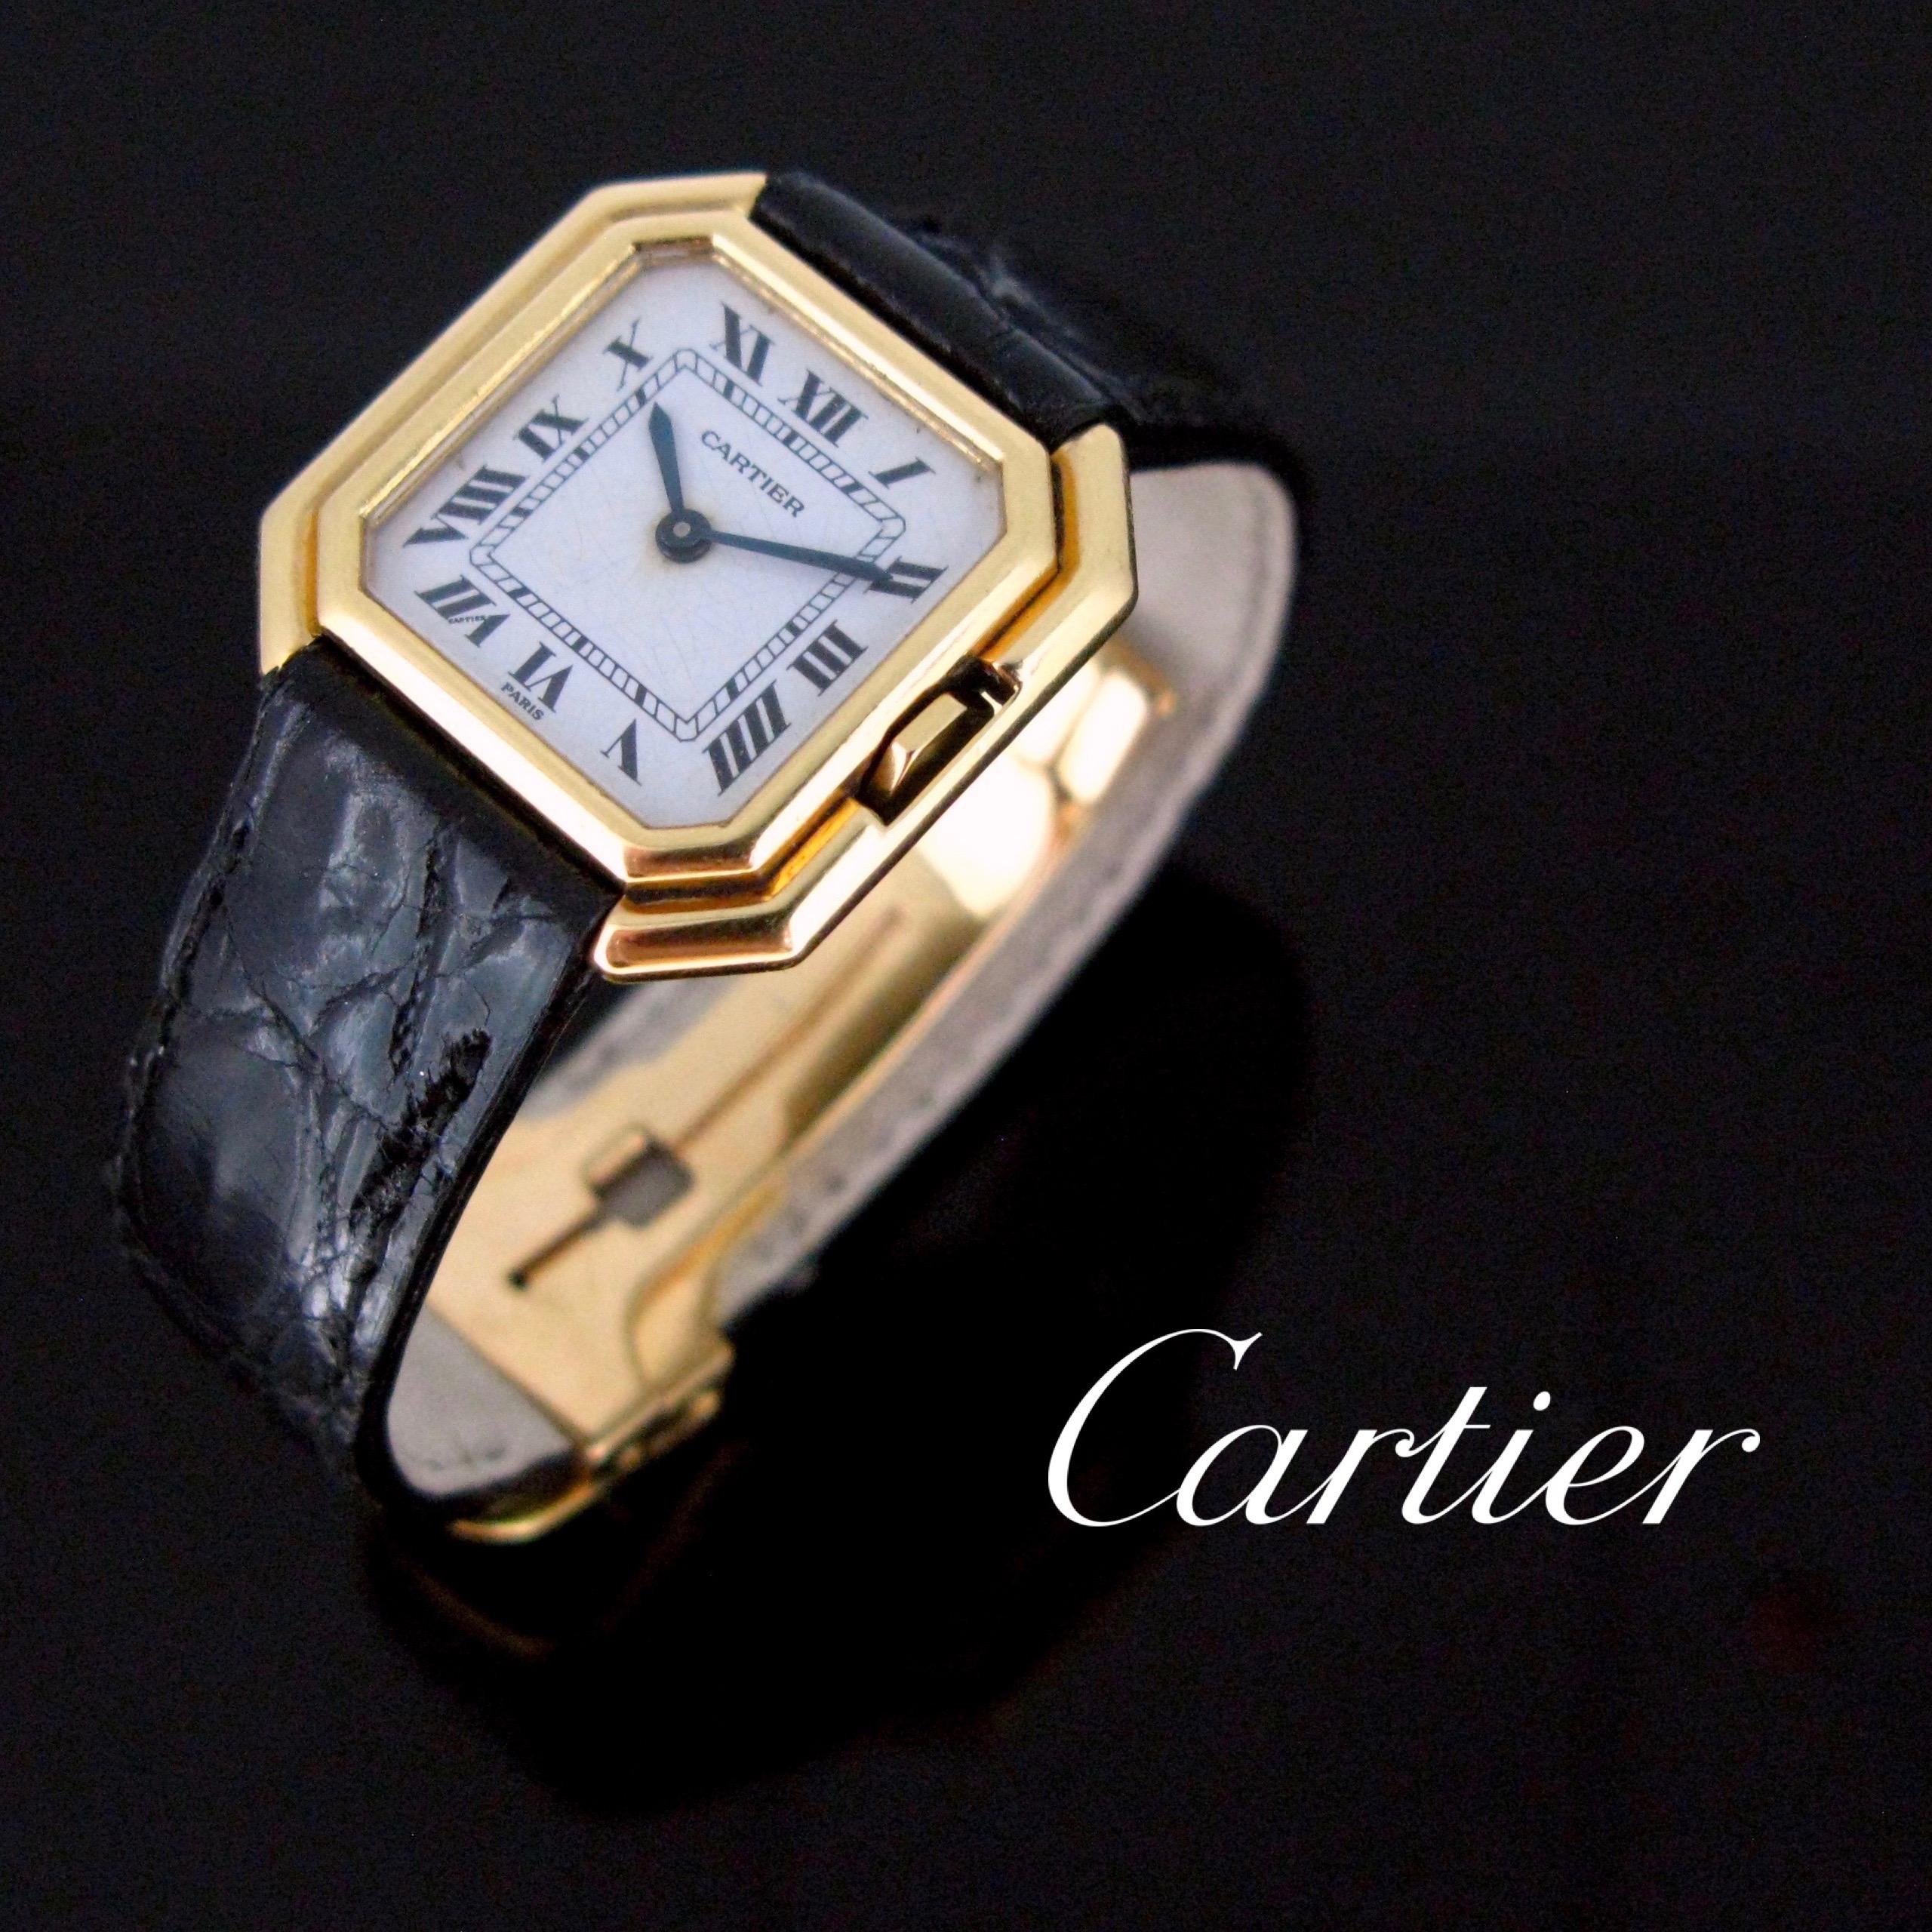 This Vintage Cartier wristwatch features an octagonal stepped case made in 18k gold case with a mechanical hidden crown. The Ceinture is set on a black leather deployment buckle. The model dates from the 70’s. It is in good